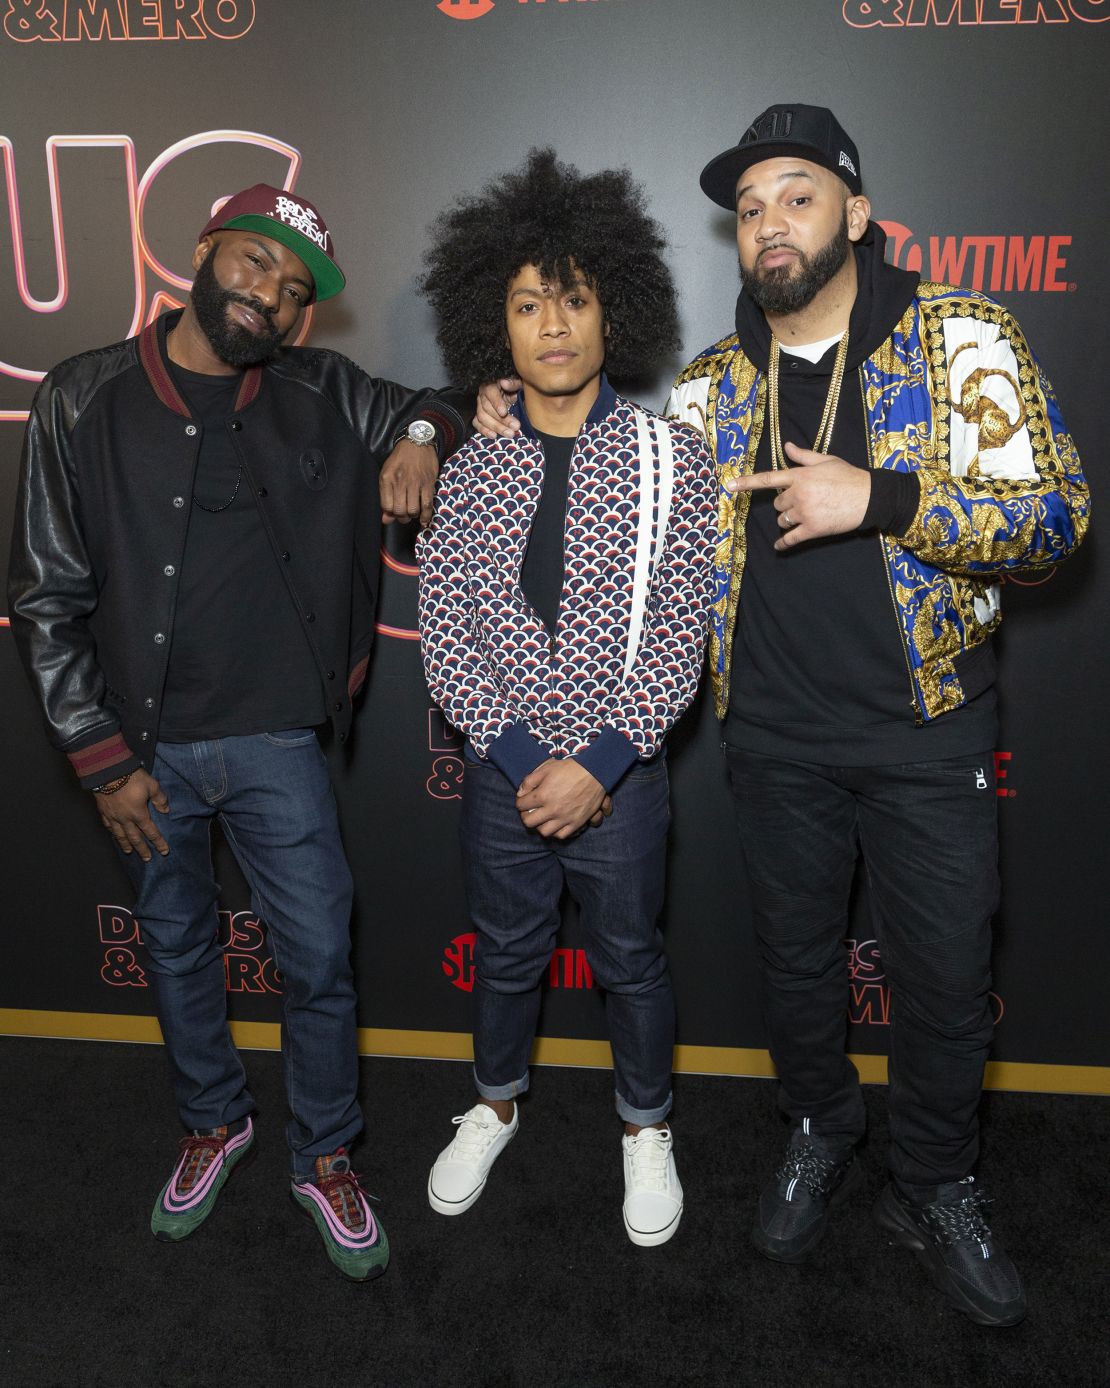 Desus Nice, Victor Lopez and The Kid Mero attend Showtime debut of "Desus & Mero" at the Clocktower New York Edition in 2019.